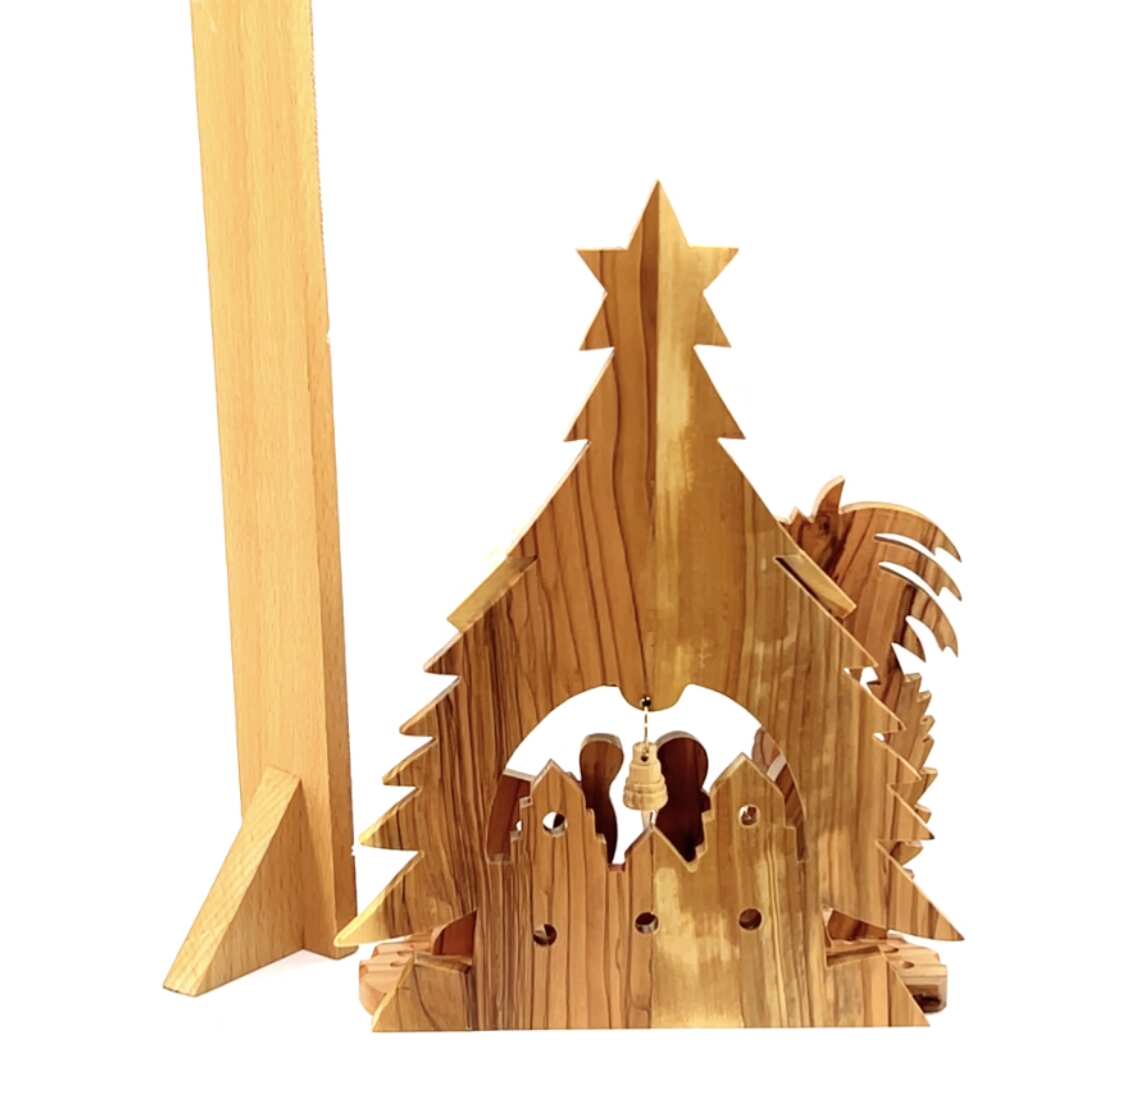 Nativity Set in Shape of Christmas with Music Player, 8.5"  from Holy Land